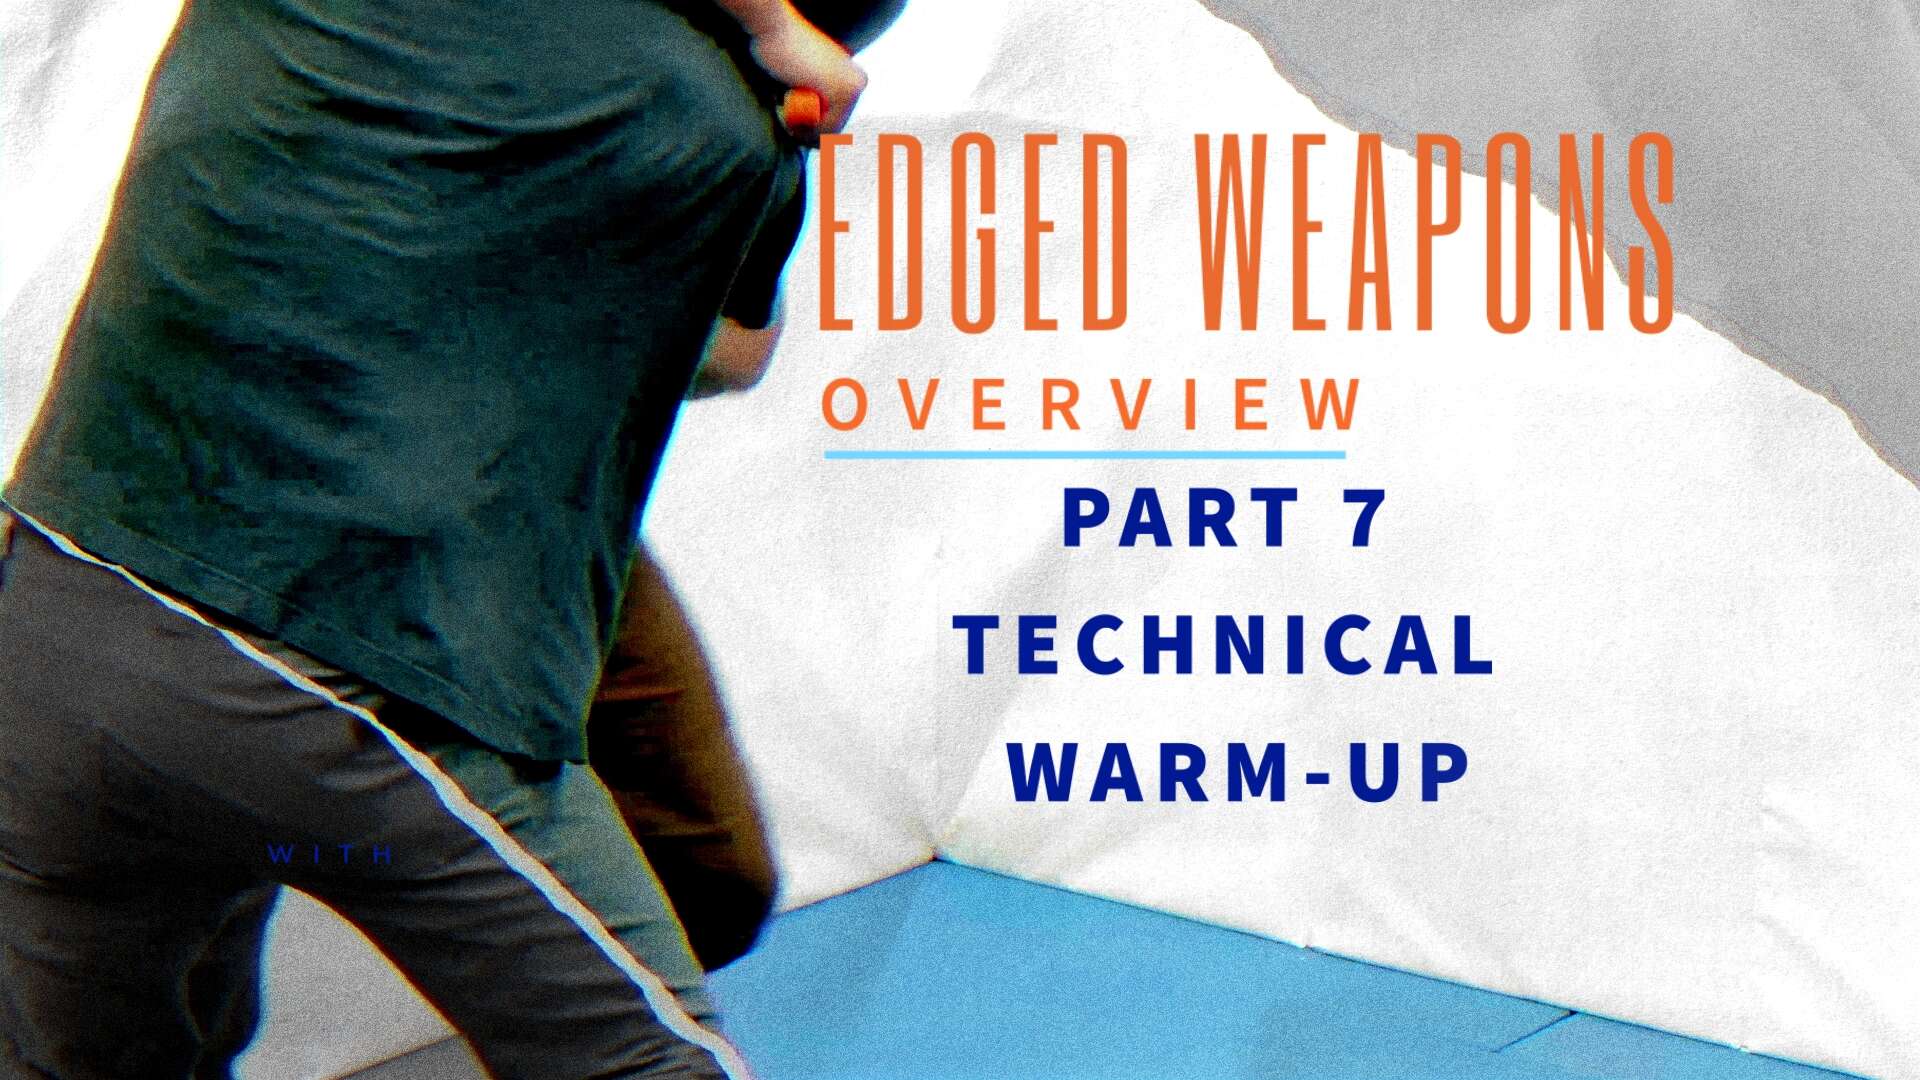 Edged Weapons Overview - Part 7: Technical Warm Up